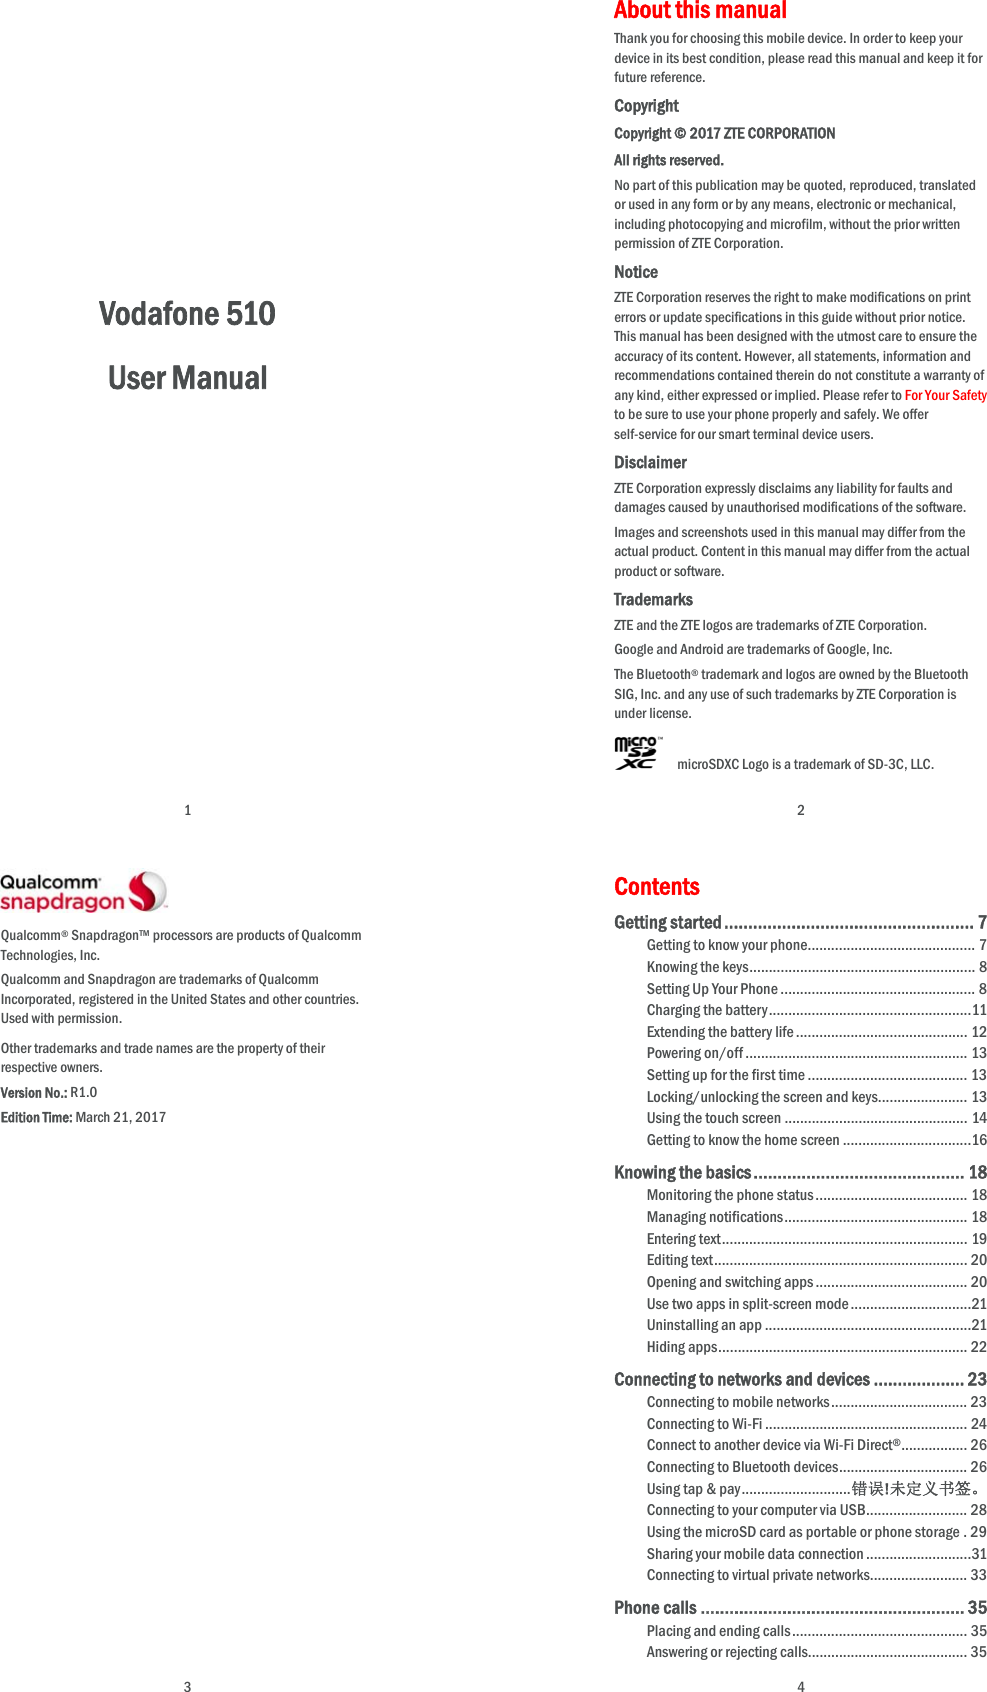  1             Vodafone 510 User Manual    2 About this manual Thank you for choosing this mobile device. In order to keep your device in its best condition, please read this manual and keep it for future reference. Copyright Copyright © 2017 ZTE CORPORATION All rights reserved. No part of this publication may be quoted, reproduced, translated or used in any form or by any means, electronic or mechanical, including photocopying and microfilm, without the prior written permission of ZTE Corporation. Notice ZTE Corporation reserves the right to make modifications on print errors or update specifications in this guide without prior notice. This manual has been designed with the utmost care to ensure the accuracy of its content. However, all statements, information and recommendations contained therein do not constitute a warranty of any kind, either expressed or implied. Please refer to For Your Safety to be sure to use your phone properly and safely. We offer self-service for our smart terminal device users.   Disclaimer ZTE Corporation expressly disclaims any liability for faults and damages caused by unauthorised modifications of the software. Images and screenshots used in this manual may differ from the actual product. Content in this manual may differ from the actual product or software. Trademarks ZTE and the ZTE logos are trademarks of ZTE Corporation. Google and Android are trademarks of Google, Inc.   The Bluetooth® trademark and logos are owned by the Bluetooth SIG, Inc. and any use of such trademarks by ZTE Corporation is under license.       microSDXC Logo is a trademark of SD-3C, LLC.  3  Qualcomm® Snapdragon™ processors are products of Qualcomm Technologies, Inc.   Qualcomm and Snapdragon are trademarks of Qualcomm Incorporated, registered in the United States and other countries. Used with permission. Other trademarks and trade names are the property of their respective owners. Version No.: R1.0 Edition Time: March 21, 2017   4 Contents Getting started .................................................... 7Getting to know your phone ........................................... 7Knowing the keys .......................................................... 8Setting Up Your Phone .................................................. 8Charging the battery ....................................................11Extending the battery life ............................................ 12Powering on/off ......................................................... 13Setting up for the first time ......................................... 13Locking/unlocking the screen and keys ....................... 13Using the touch screen ............................................... 14Getting to know the home screen .................................16Knowing the basics ............................................ 18Monitoring the phone status ....................................... 18Managing notifications ............................................... 18Entering text ............................................................... 19Editing text ................................................................. 20Opening and switching apps ....................................... 20Use two apps in split-screen mode ...............................21Uninstalling an app .....................................................21Hiding apps ................................................................ 22Connecting to networks and devices ................... 23Connecting to mobile networks ................................... 23Connecting to Wi-Fi .................................................... 24Connect to another device via Wi-Fi Direct® .................  26Connecting to Bluetooth devices ................................. 26Using tap &amp; pay ............................ 错误!未定义书签。Connecting to your computer via USB .......................... 28Using the microSD card as portable or phone storage . 29Sharing your mobile data connection ........................... 31Connecting to virtual private networks ......................... 33Phone calls ....................................................... 35Placing and ending calls ............................................. 35Answering or rejecting calls......................................... 35